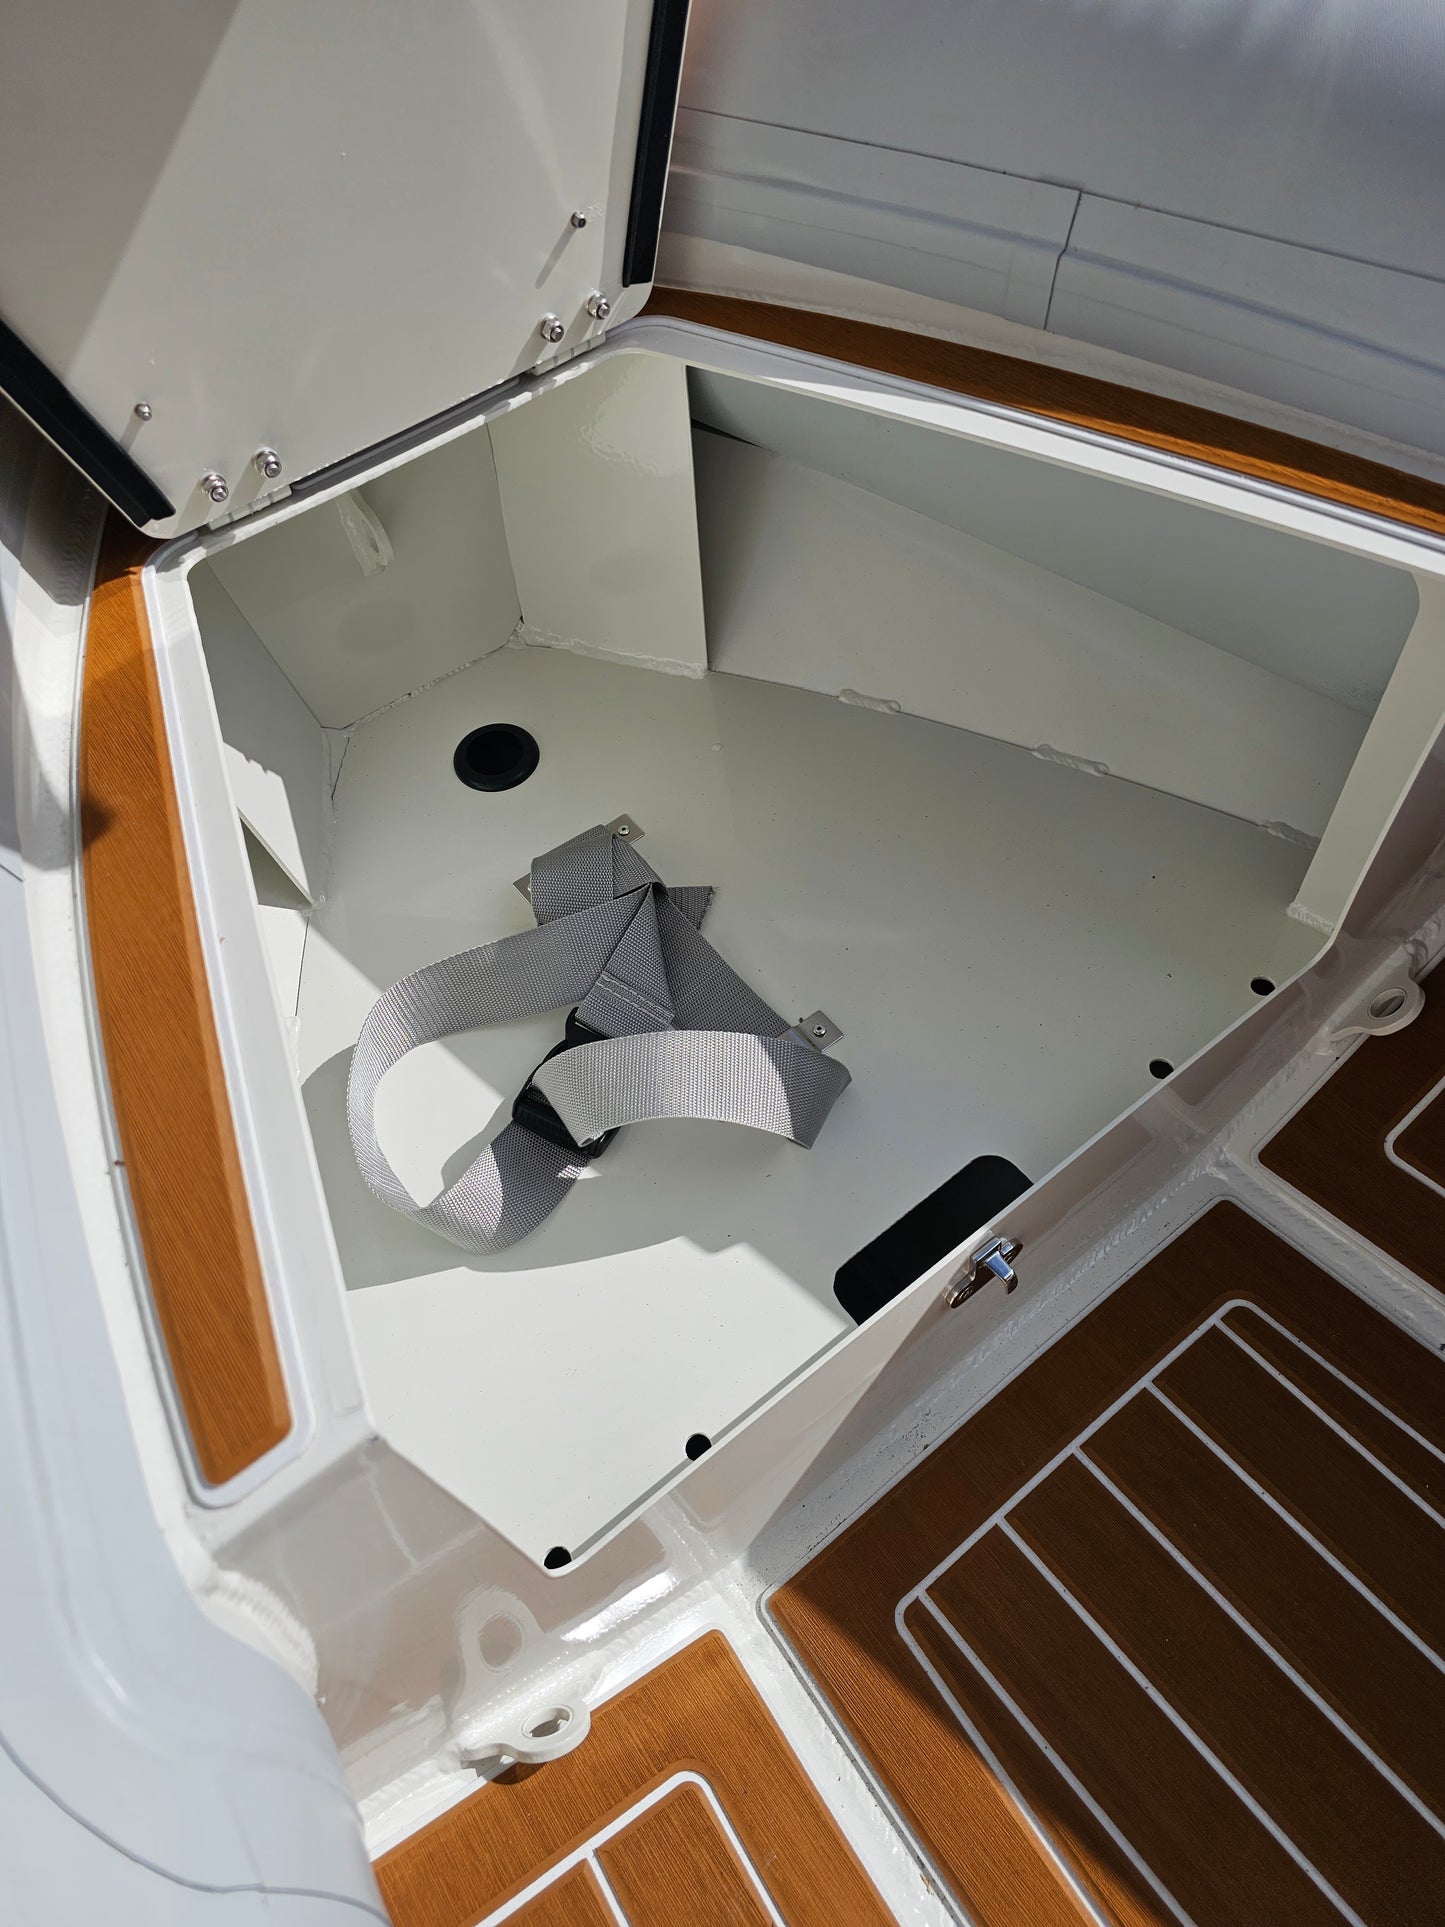 Rebel 330 Yacht Tender Edition - Floating Console